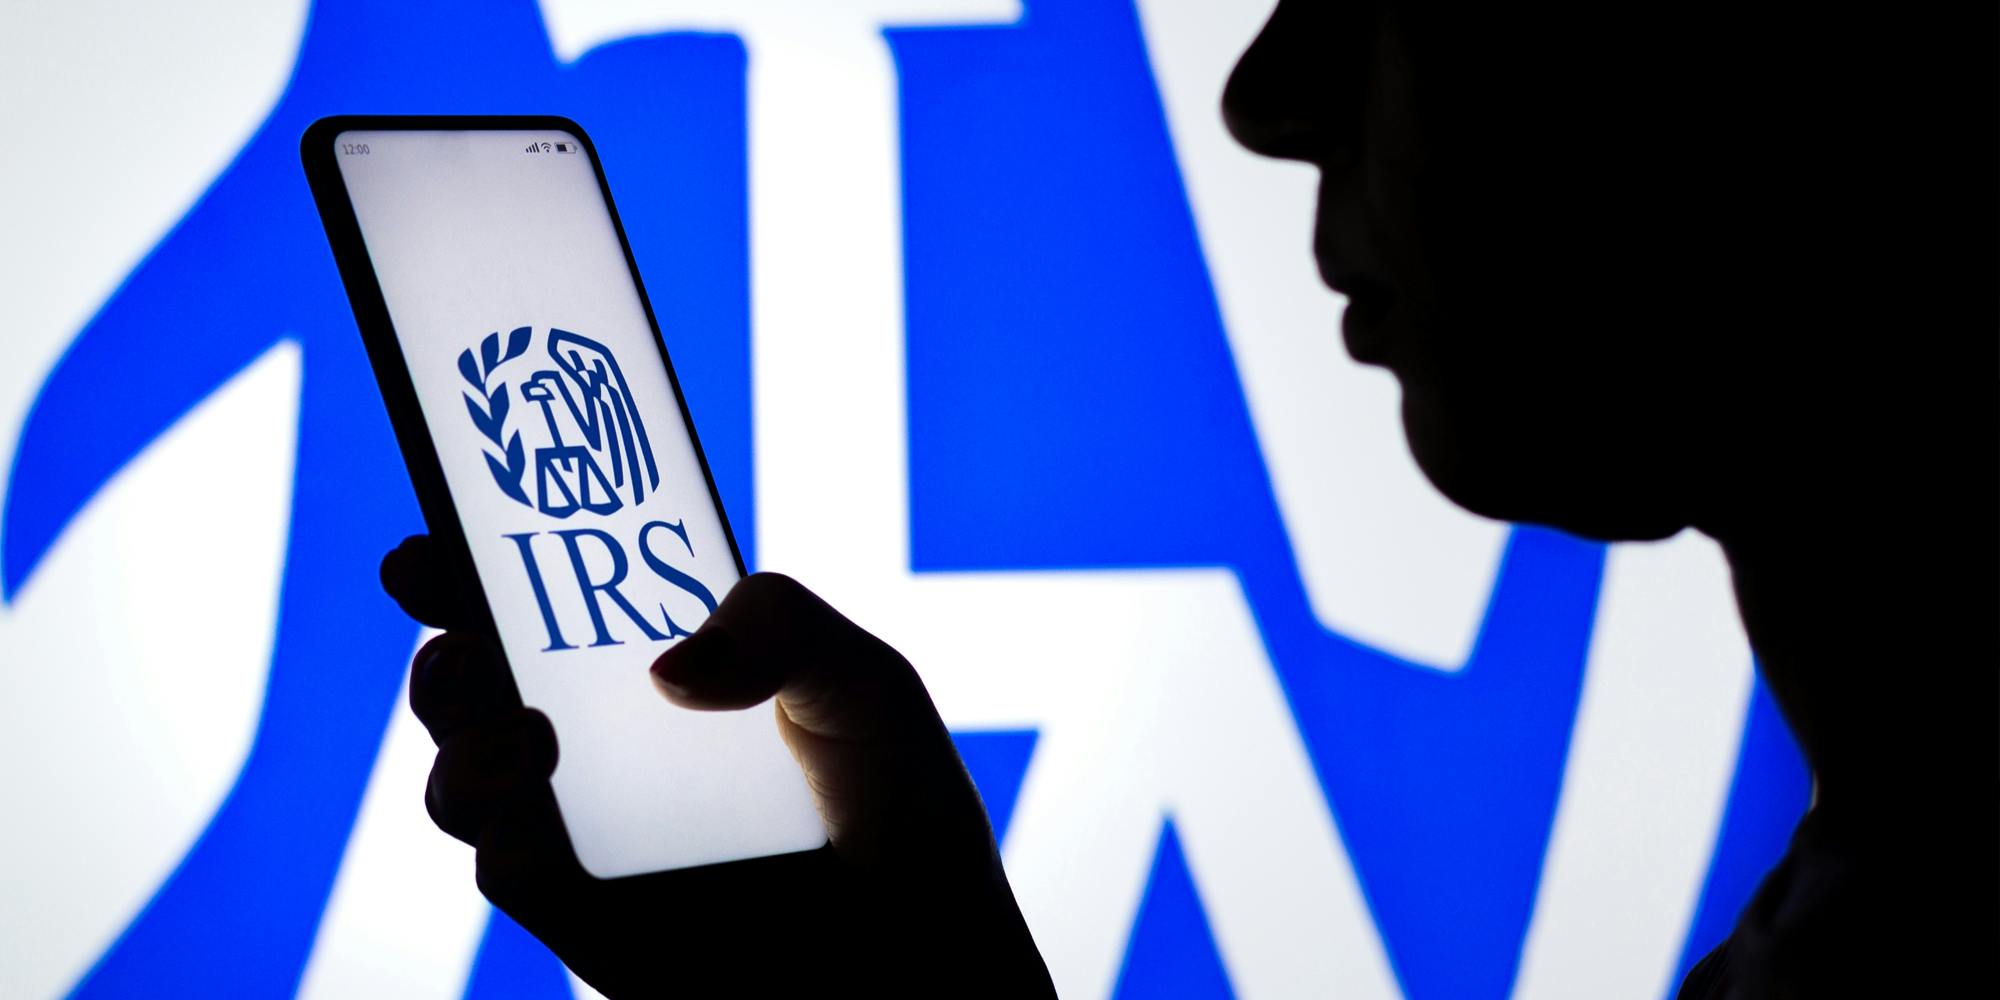 Silhouette of person holding phone with Irs logo on it